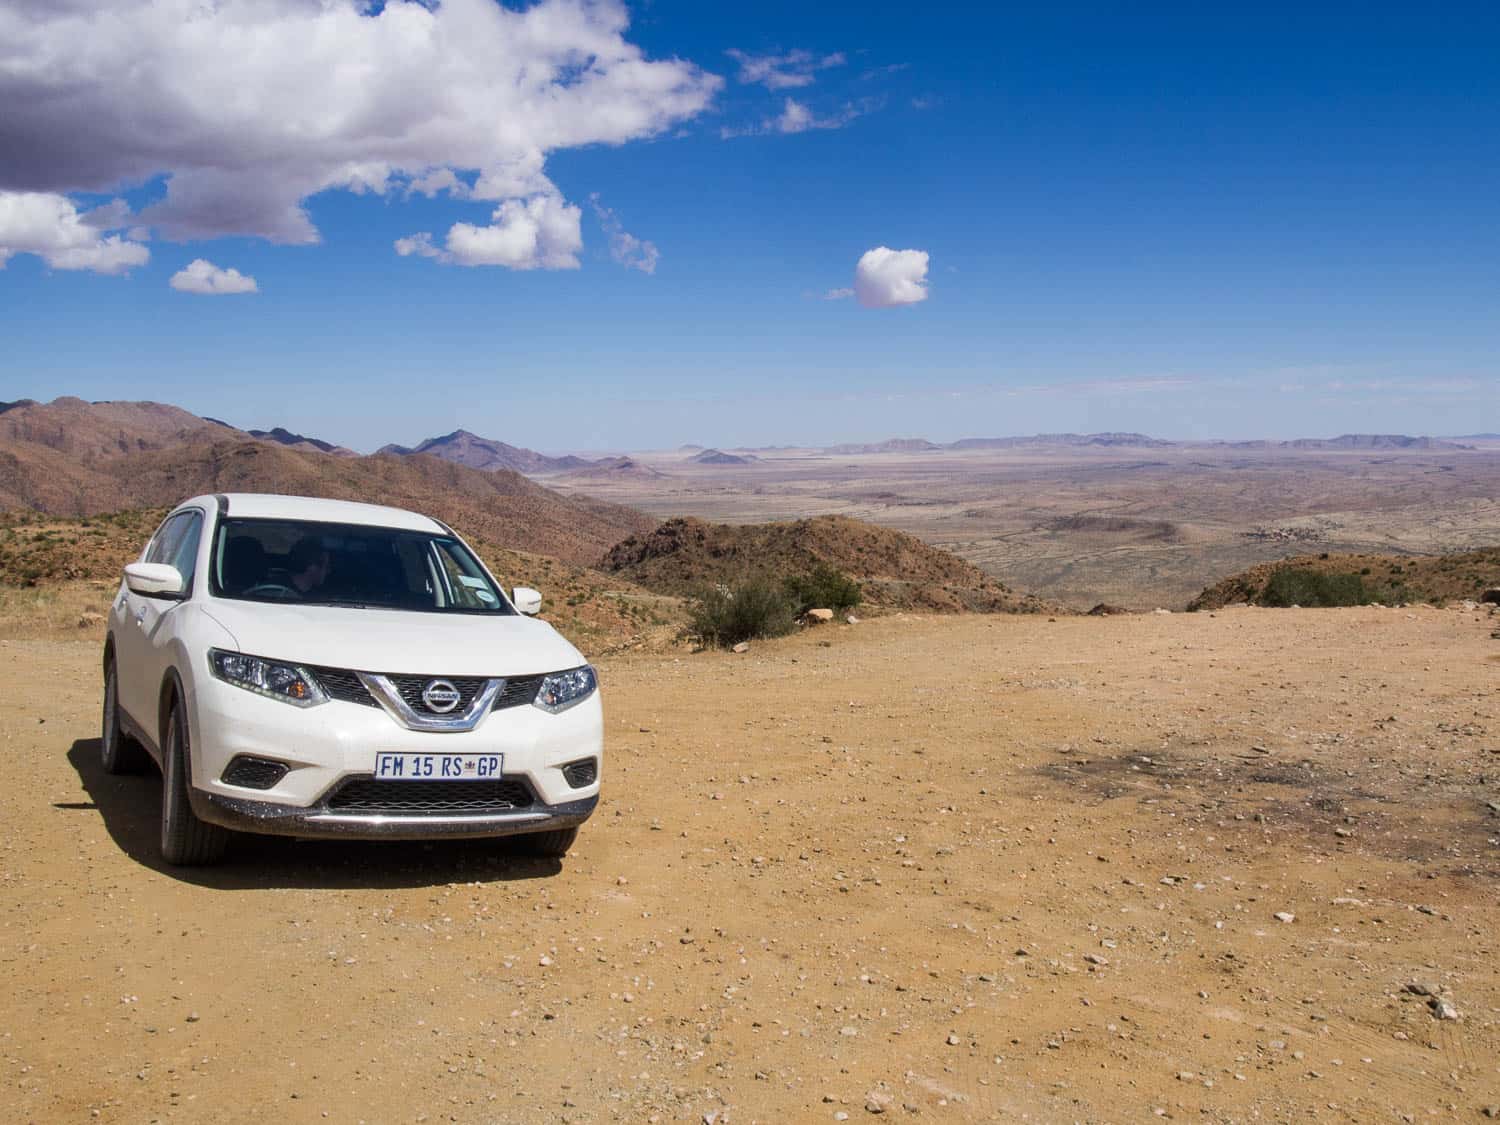 Our Nissan X-Trail SUV, one of our biggest Namibia travel expenses